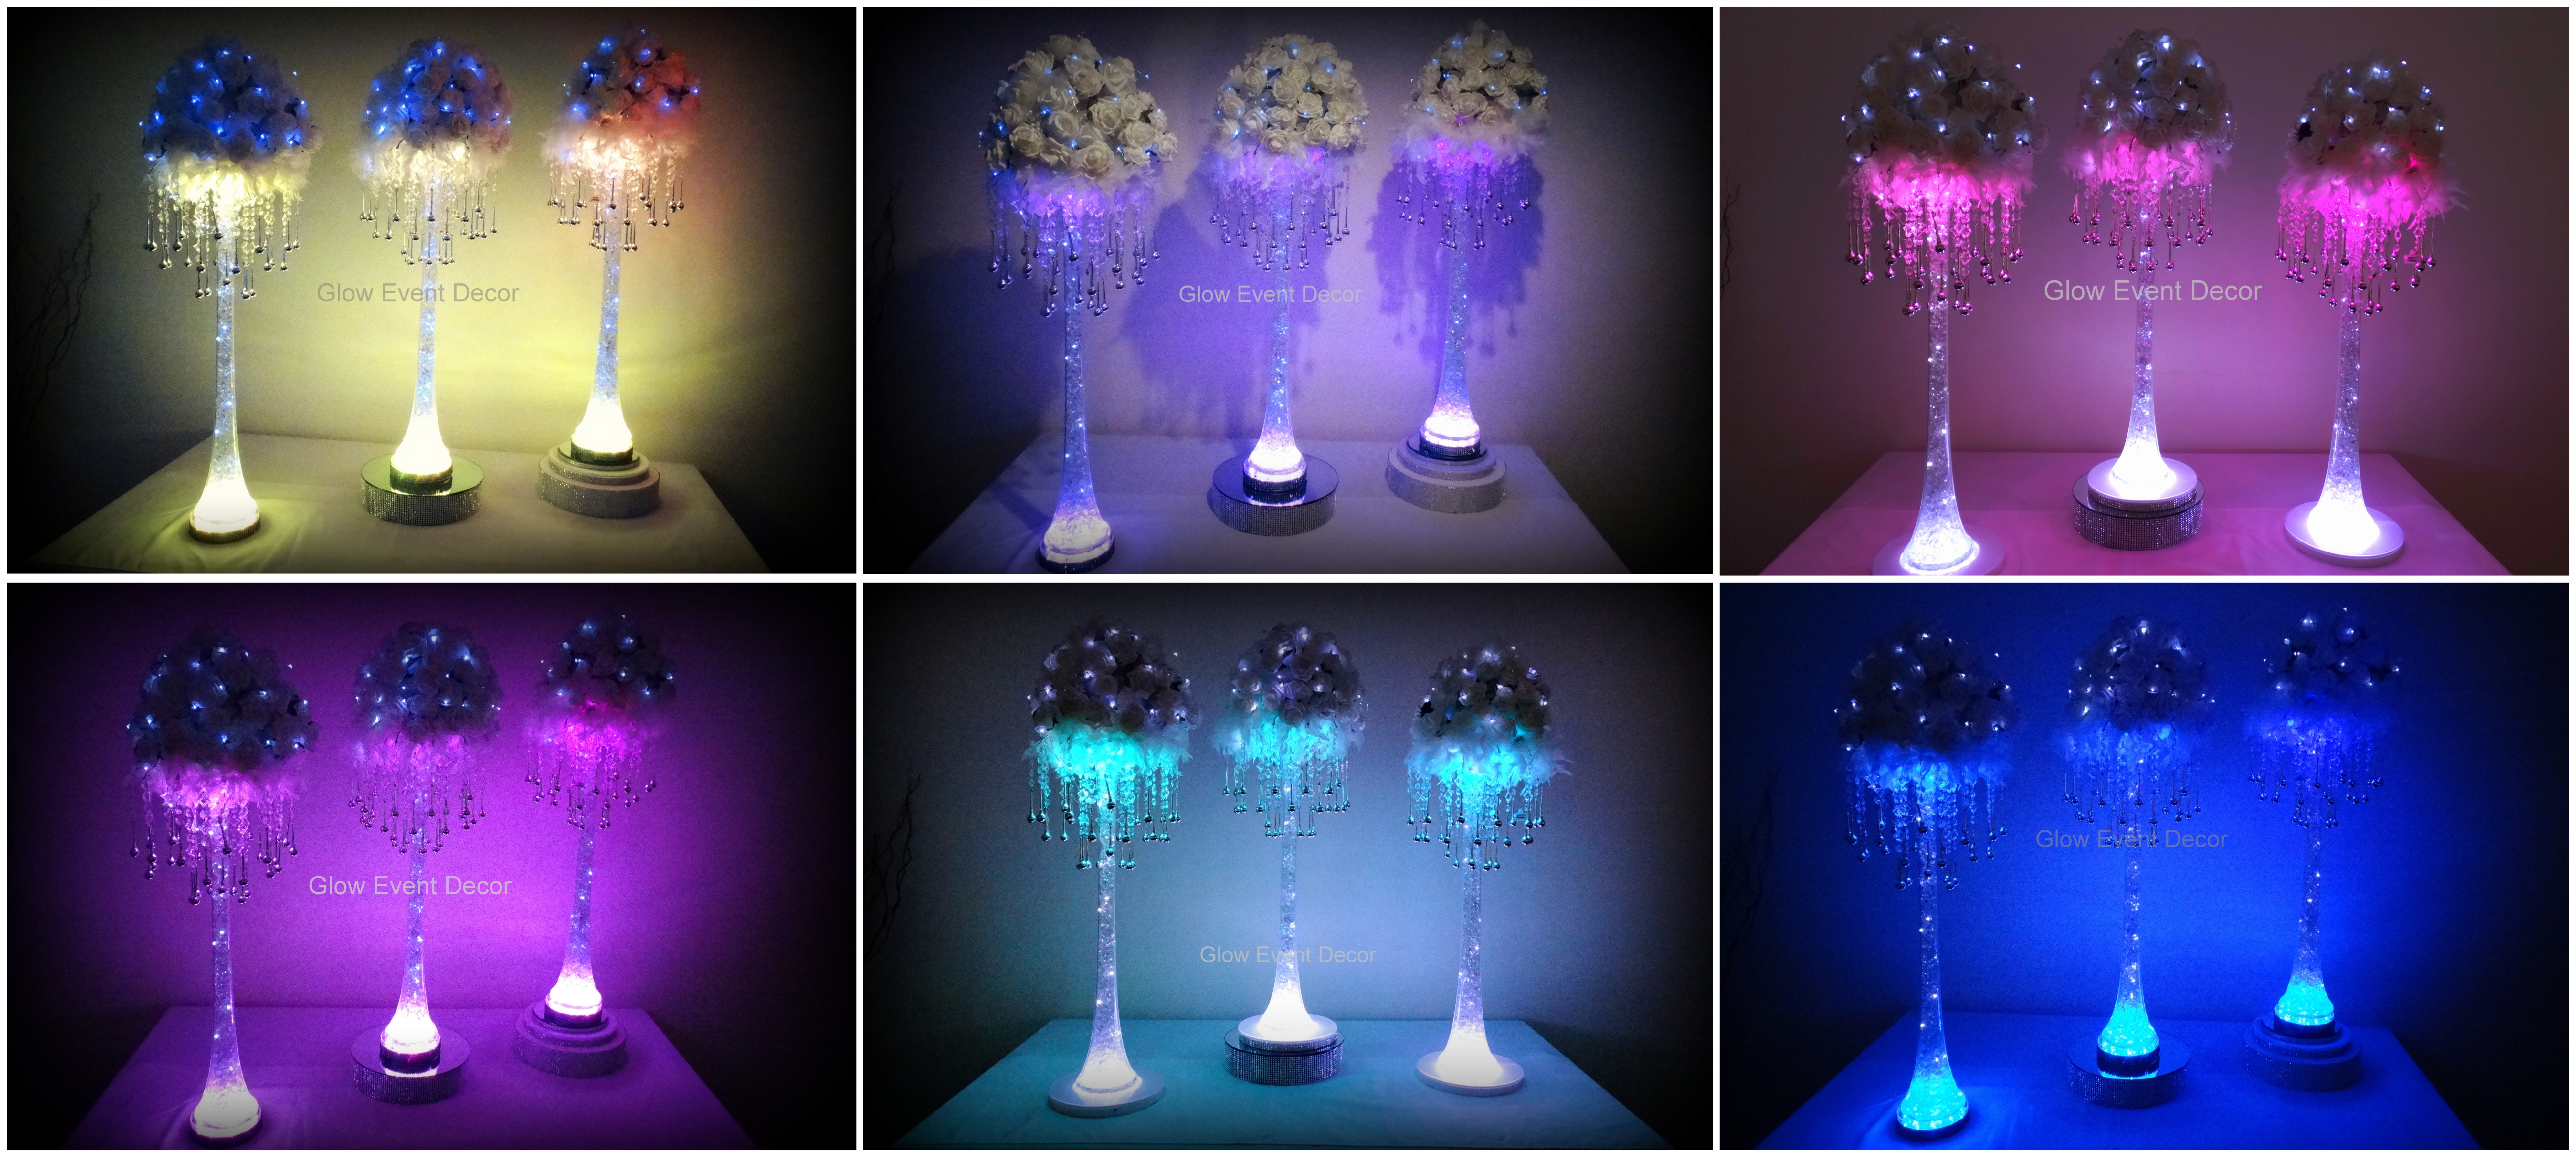 selection of LED eiffel tower silver raindrop rose and ostrich feather table decoration centrepieces for hire in Adelaide from Glow Event Decor